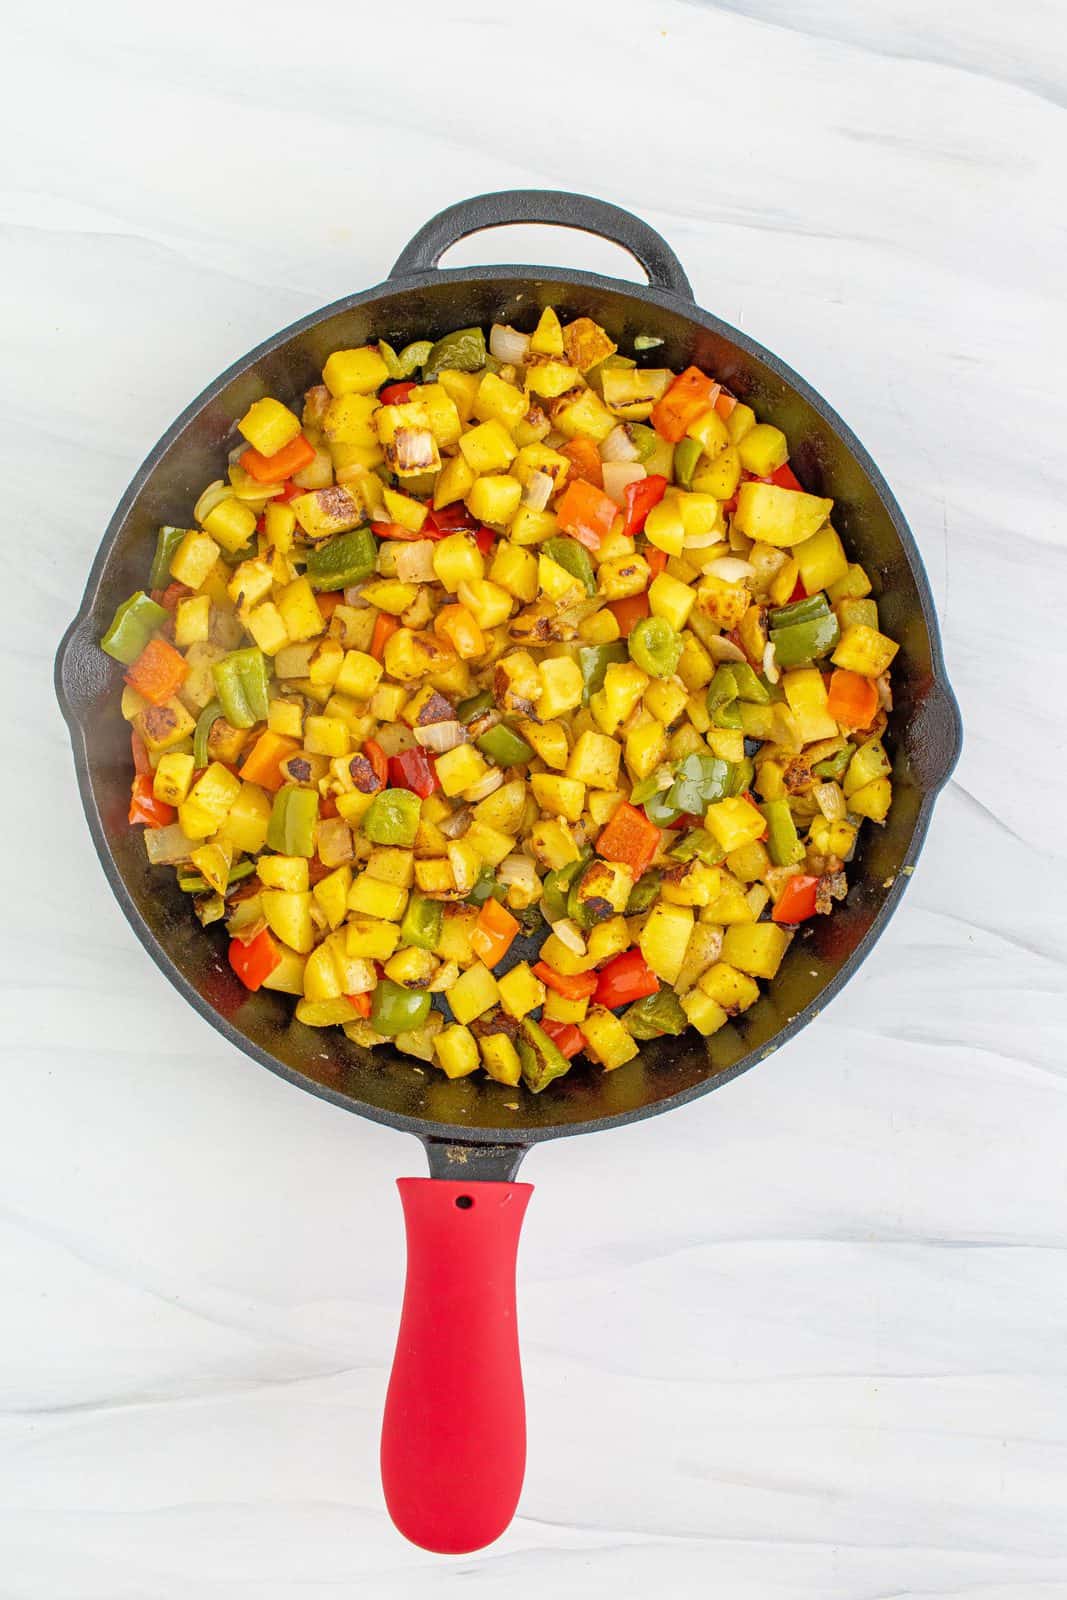 Cooked potatoes in vegetables in skillet.